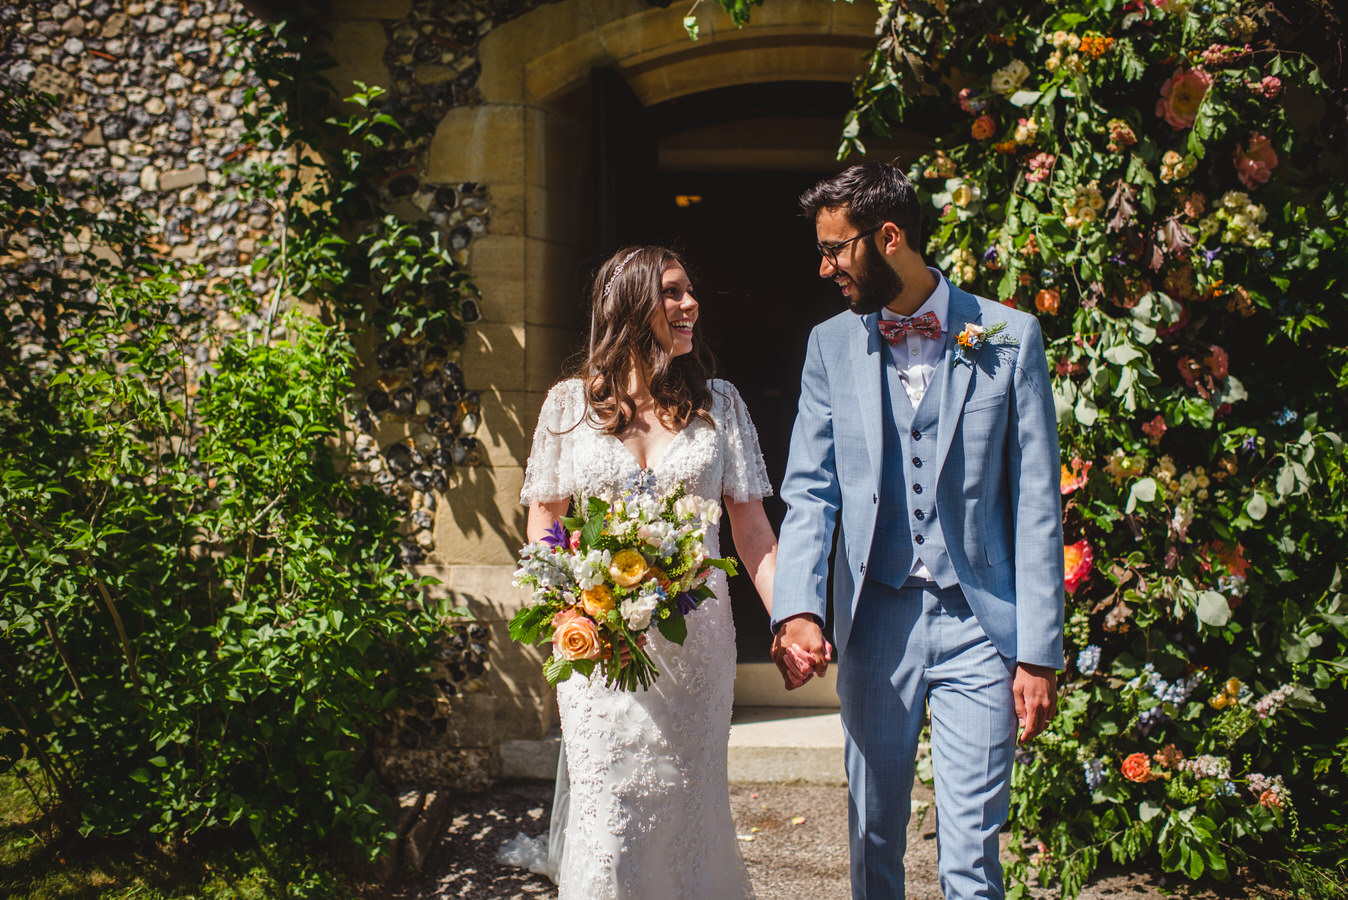 Chris and Emilys stunning sailcloth wedding in the Surrey countryside pic pic